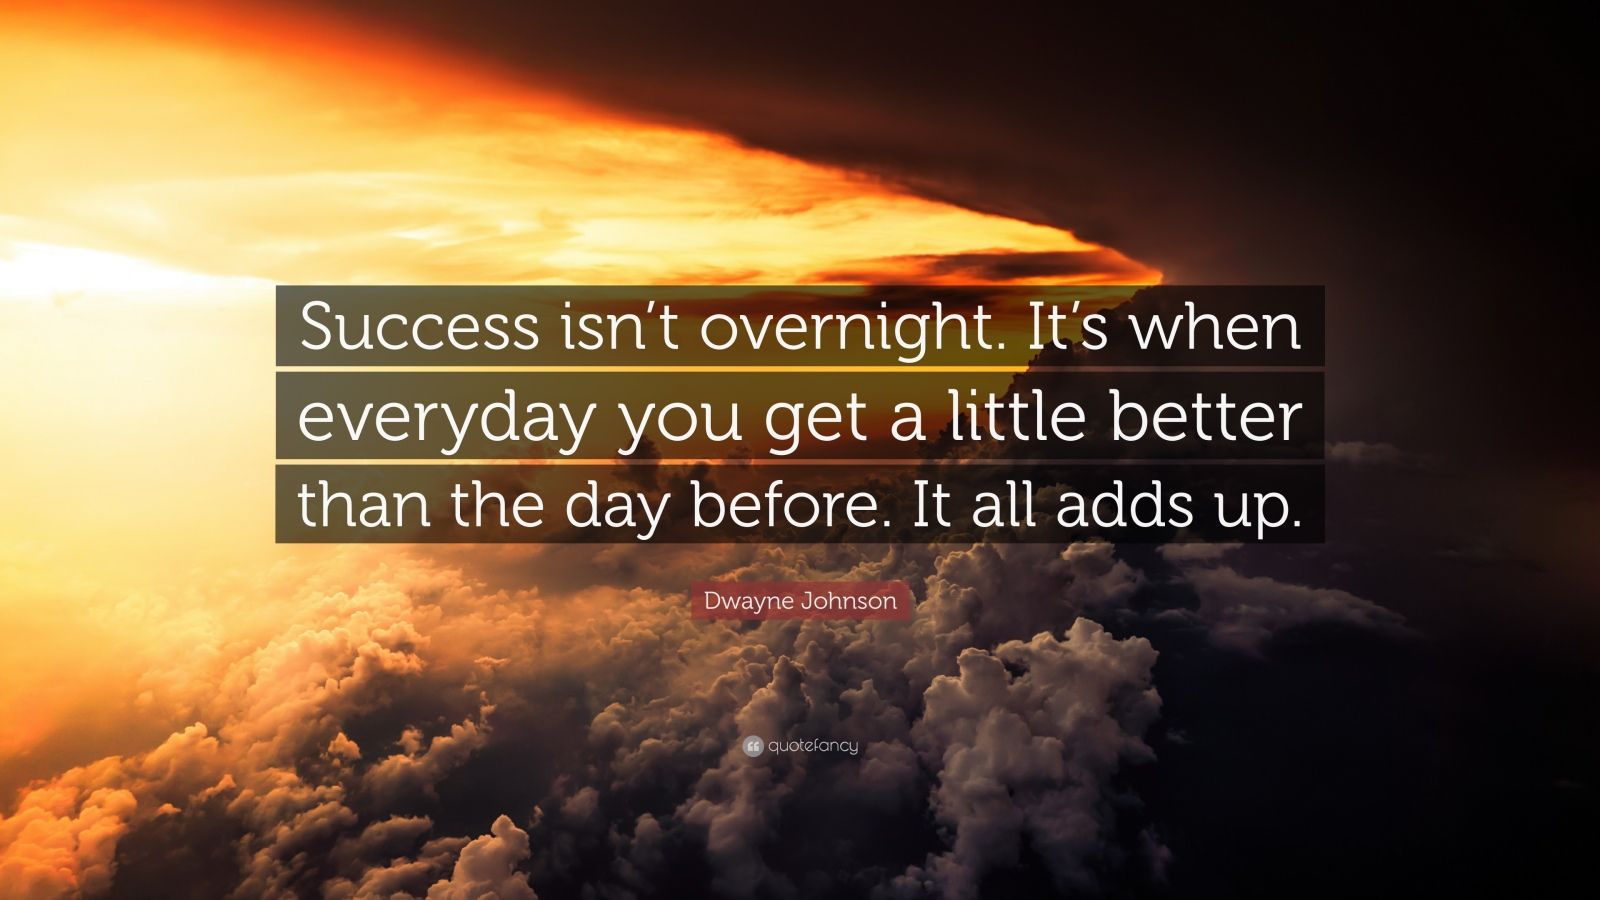 Dwayne Johnson Quote: "Success isn't overnight. It's when everyday you get a little better than ...